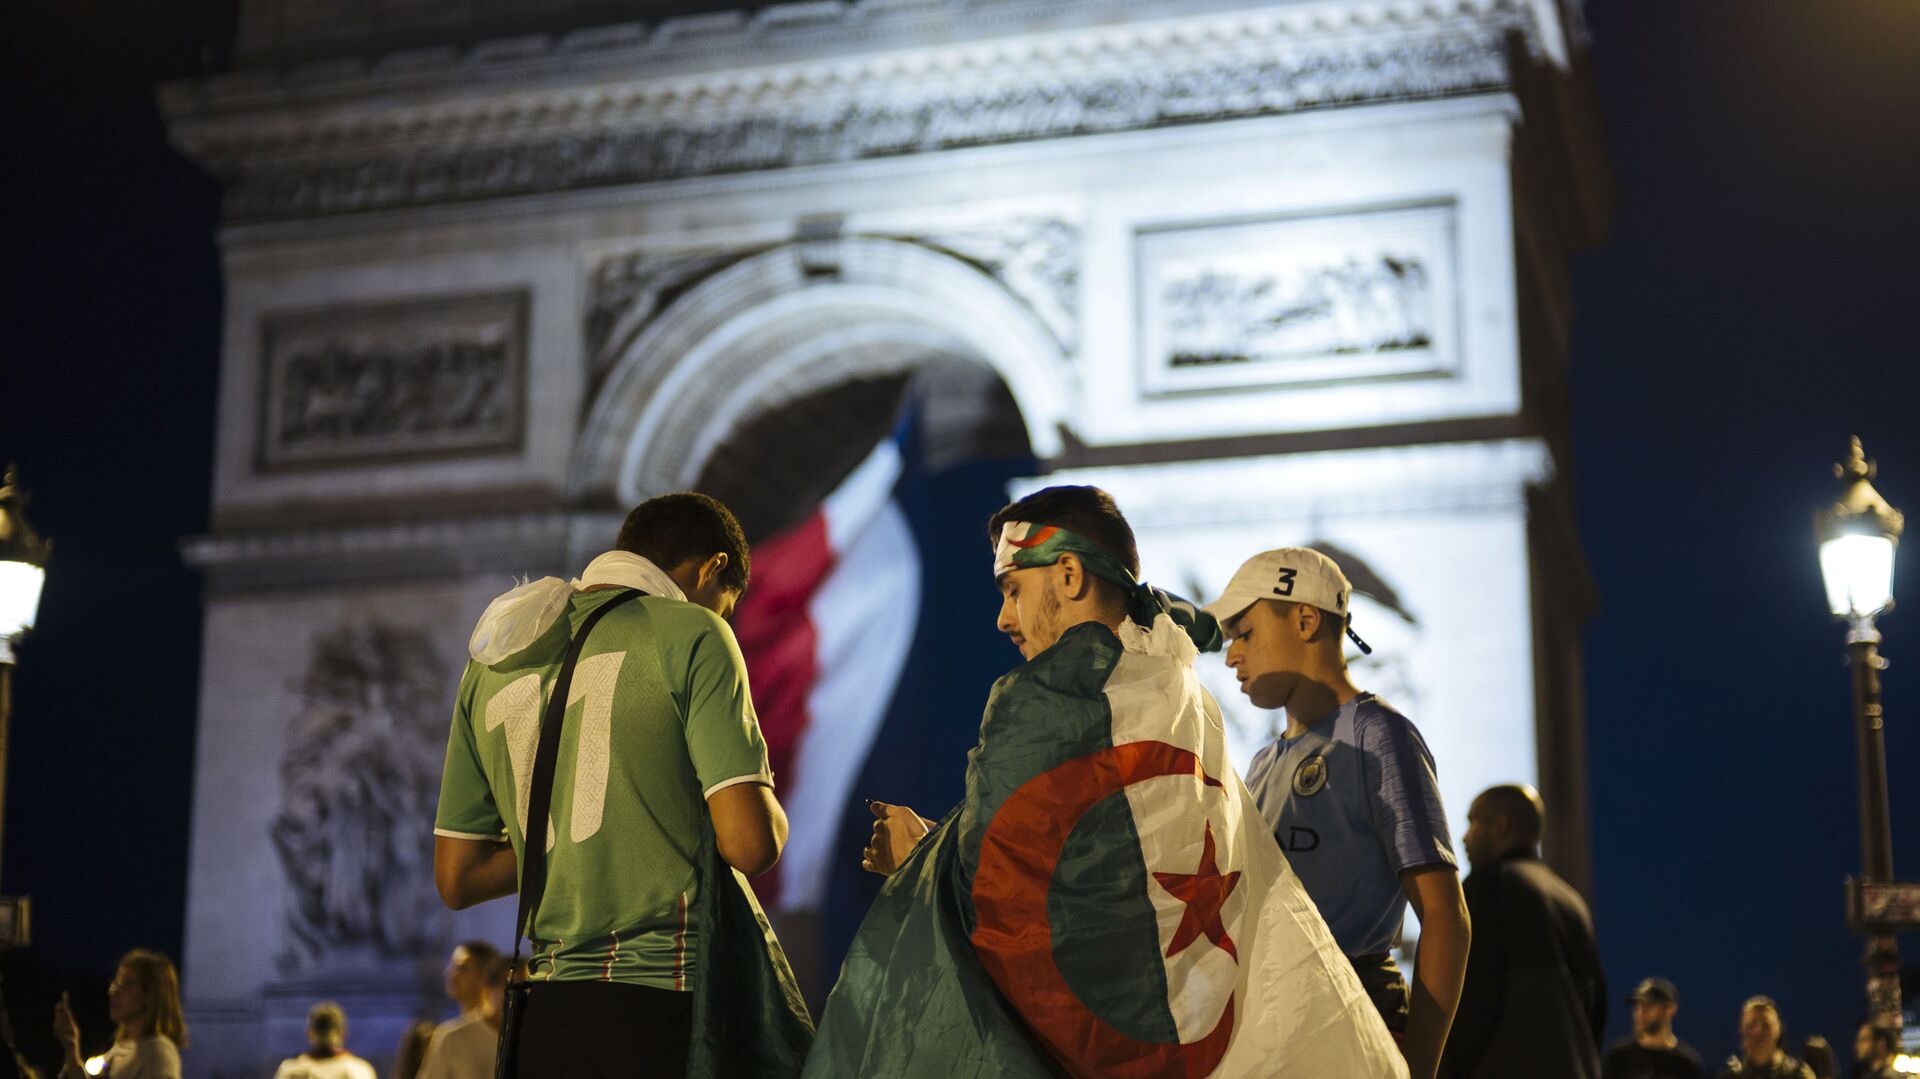 Algerians fans check their phones as the Arc de Triomphe is seen in the background after the African Cup of Nations semifinal soccer match between Algeria and Nigeria in Paris, France, Sunday, July 14, 2019.  - Sputnik International, 1920, 02.10.2021